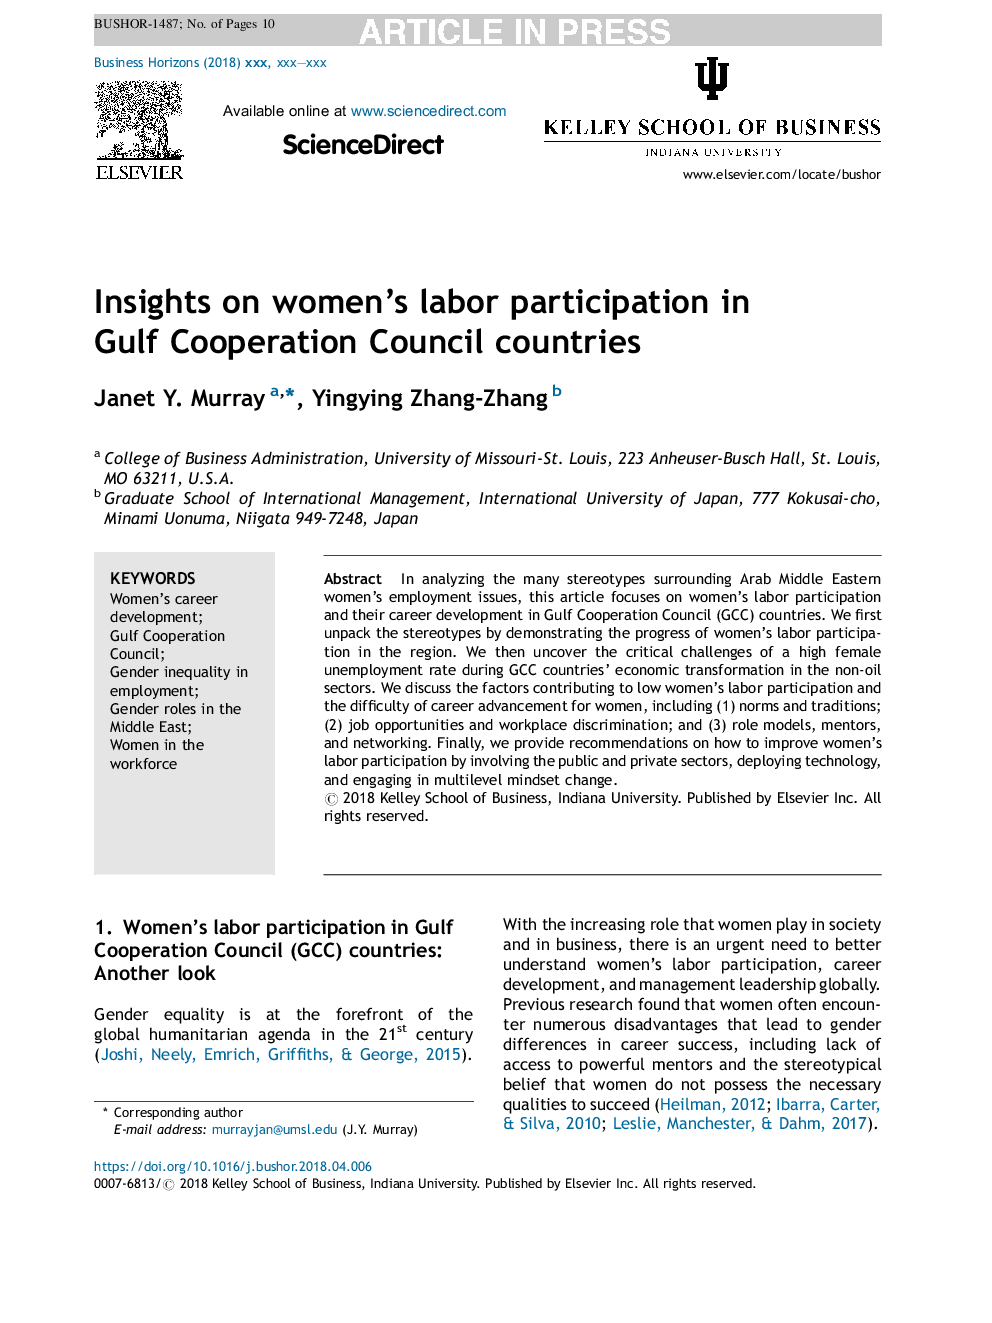 Insights on women's labor participation in Gulf Cooperation Council countries